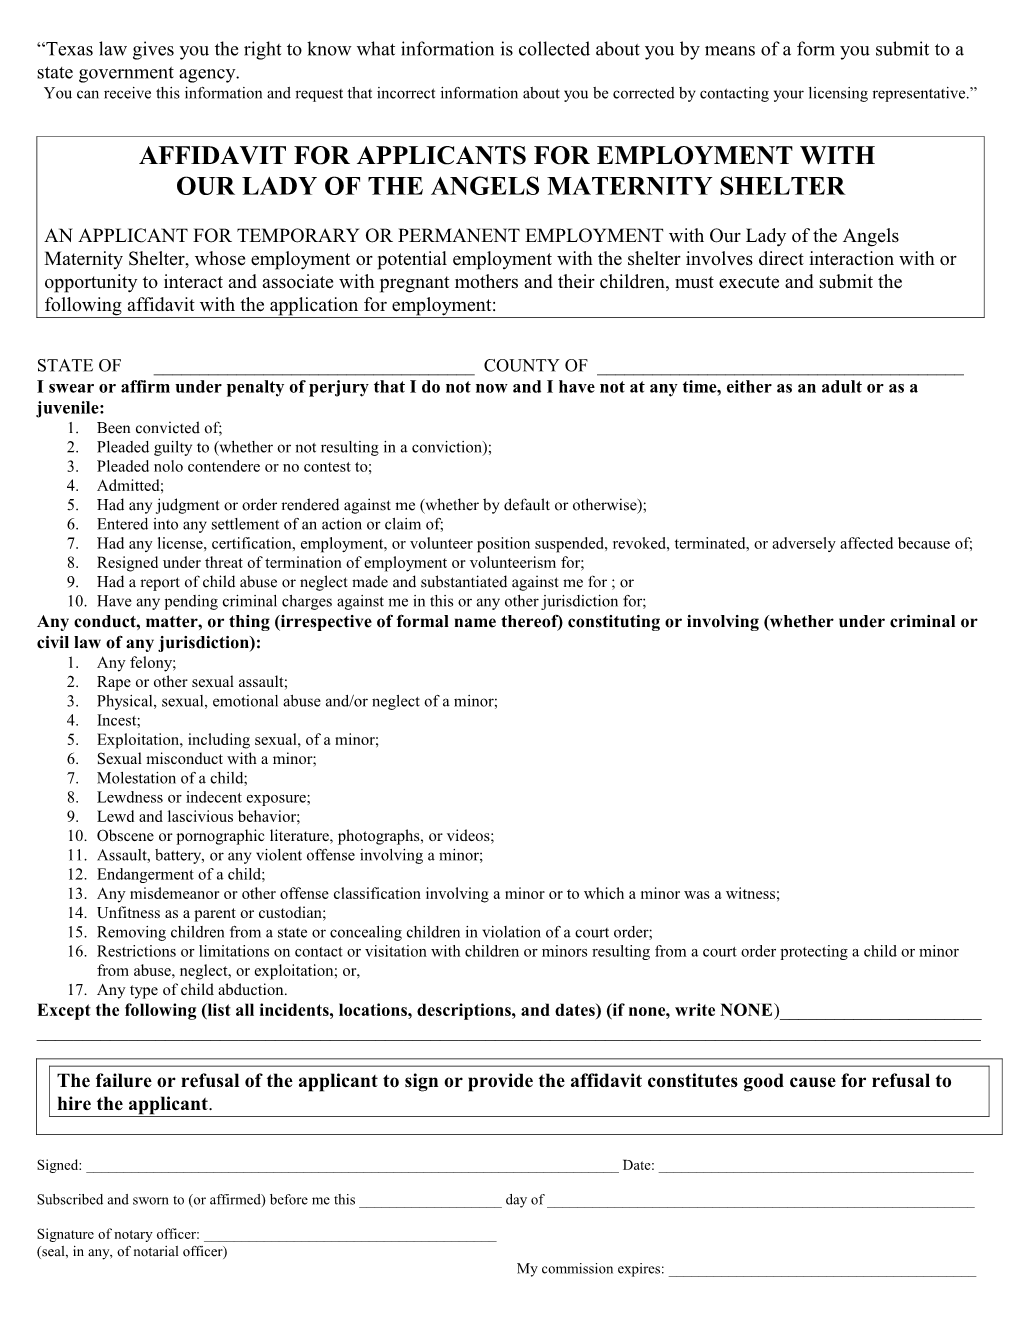 Affidavit for Applicants for Employment with a Childcare Operation